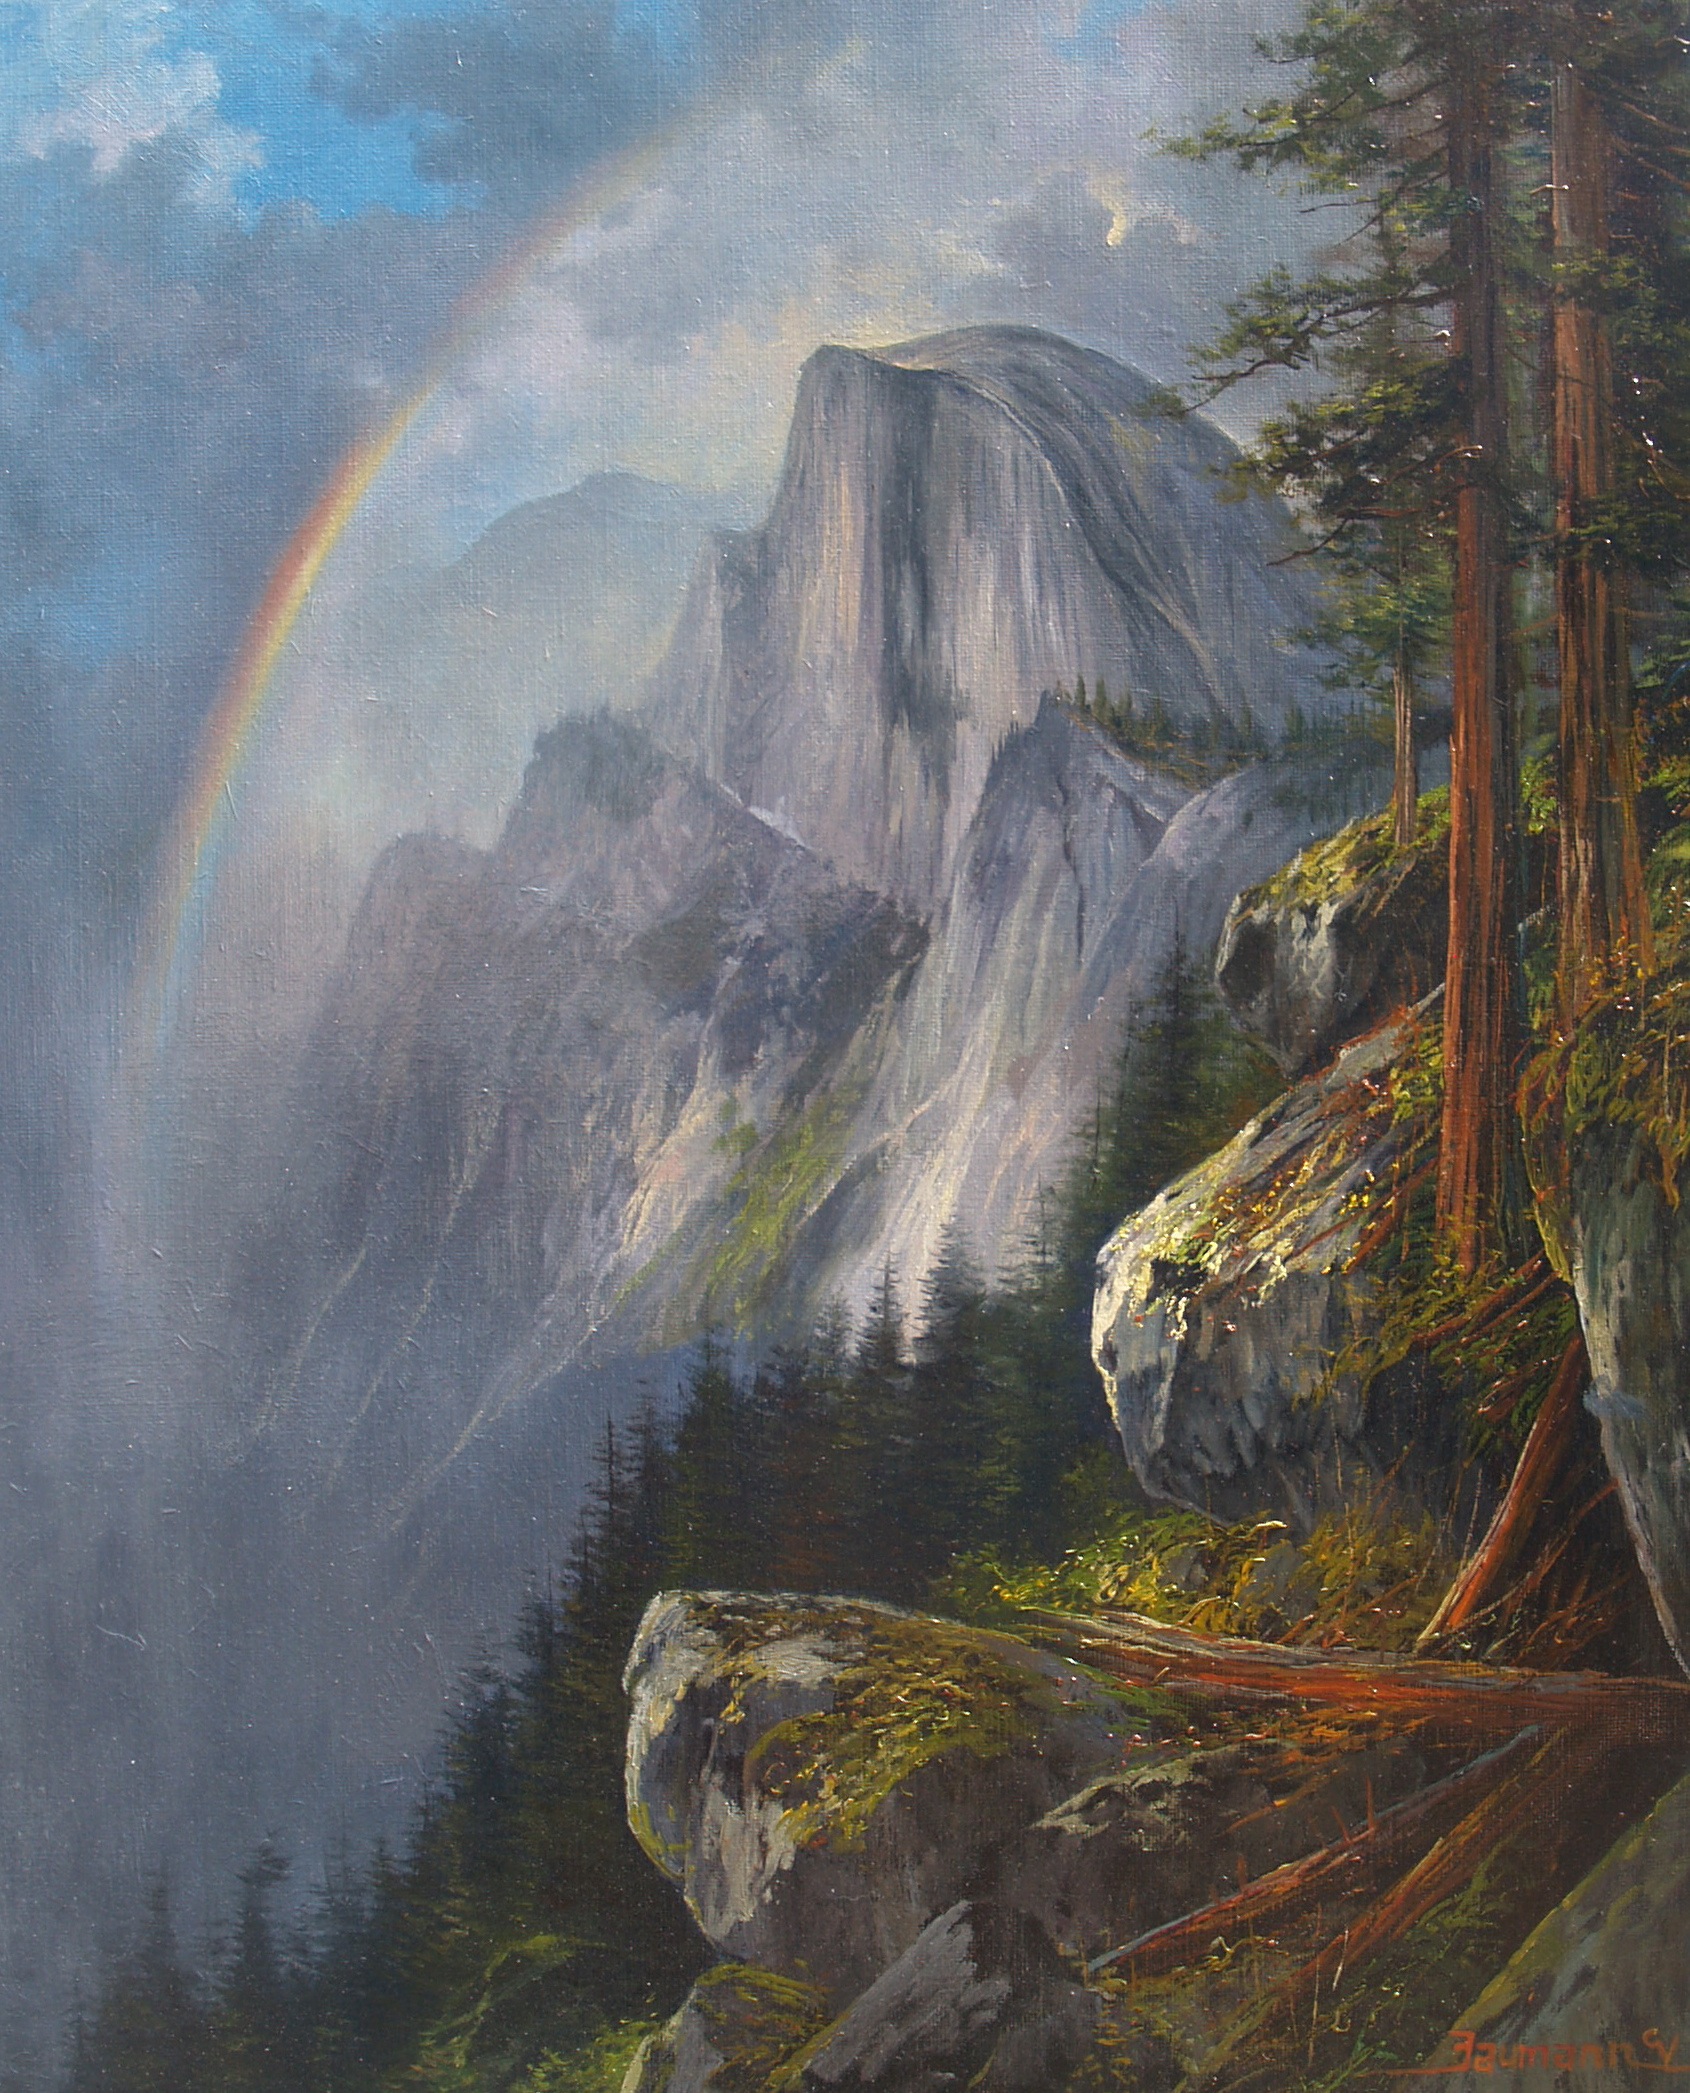 This is an oil painting by Stefan Baumann titled After the Storm of Half Dome from Glacier Point in Yosemite National Park showing a rainbow after a storm..